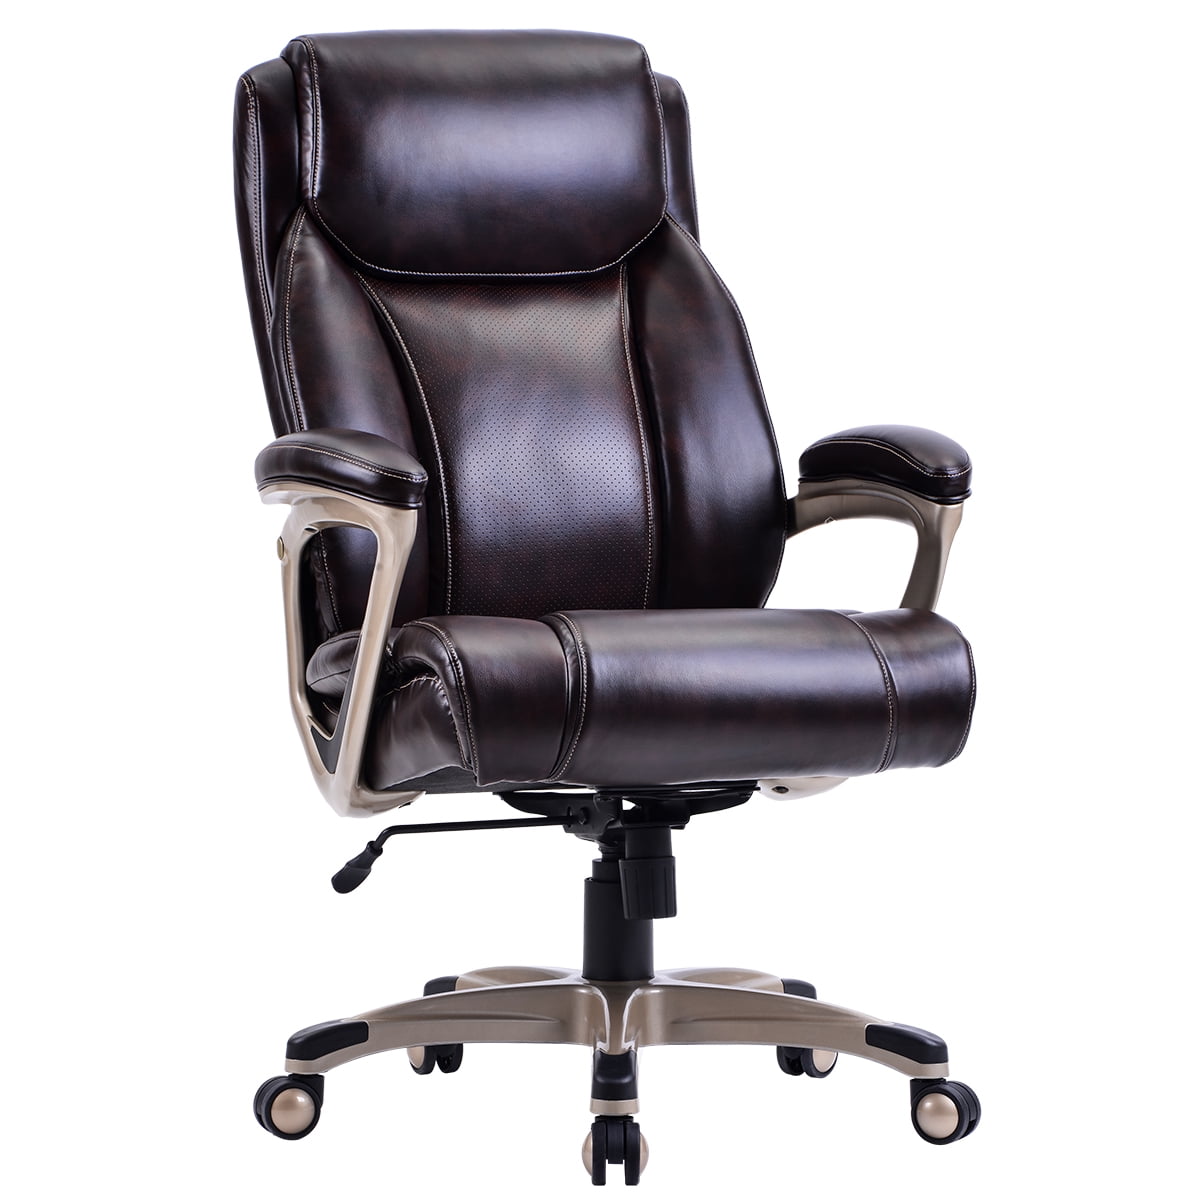 Leather Office Chair, Office Chair Desk Chair, Champagne High Back